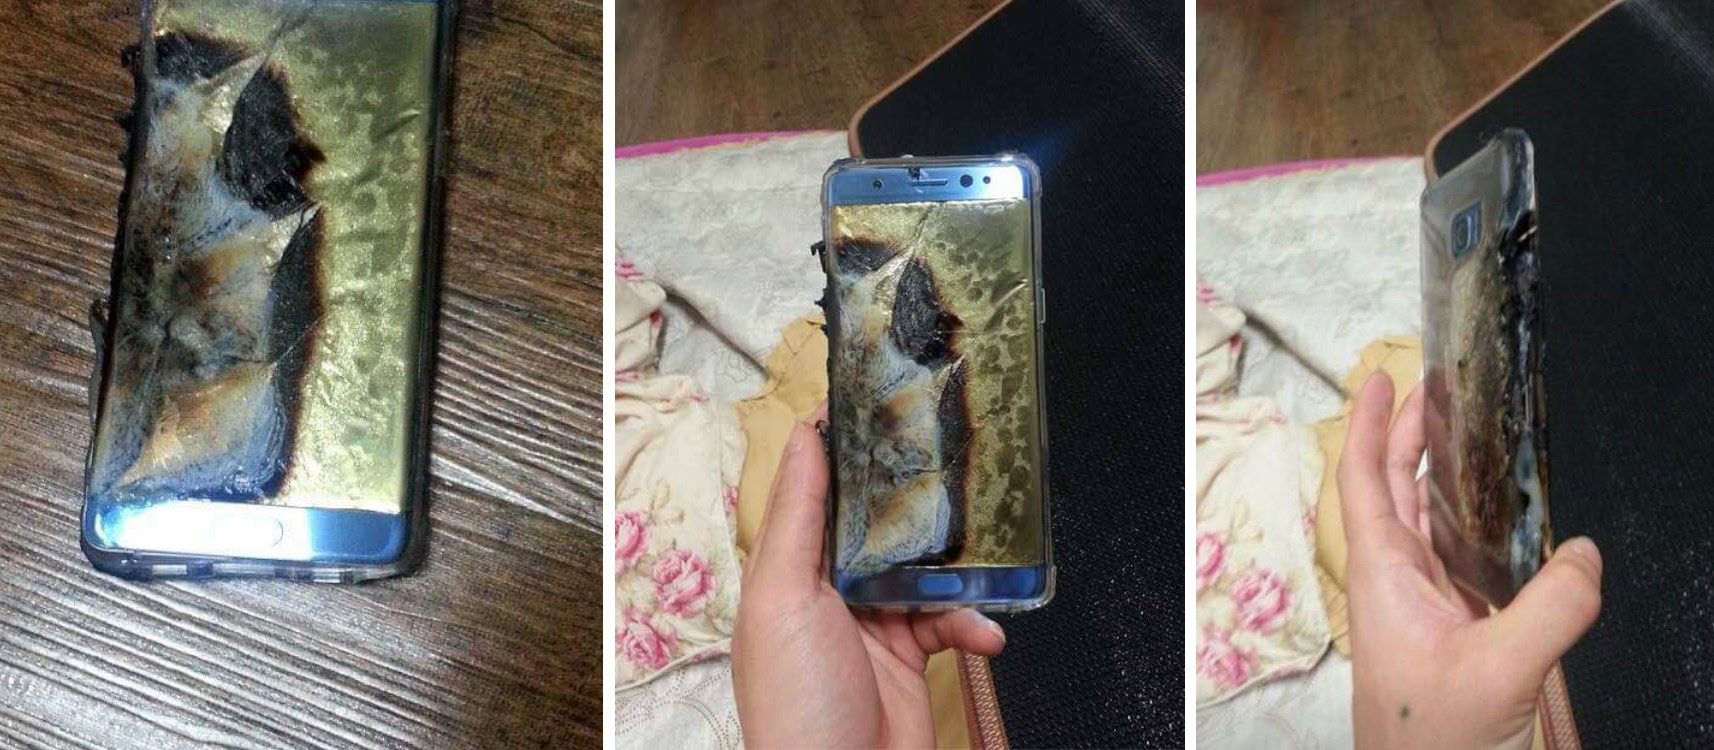 Why do phones explode, and what can you do to yourself?